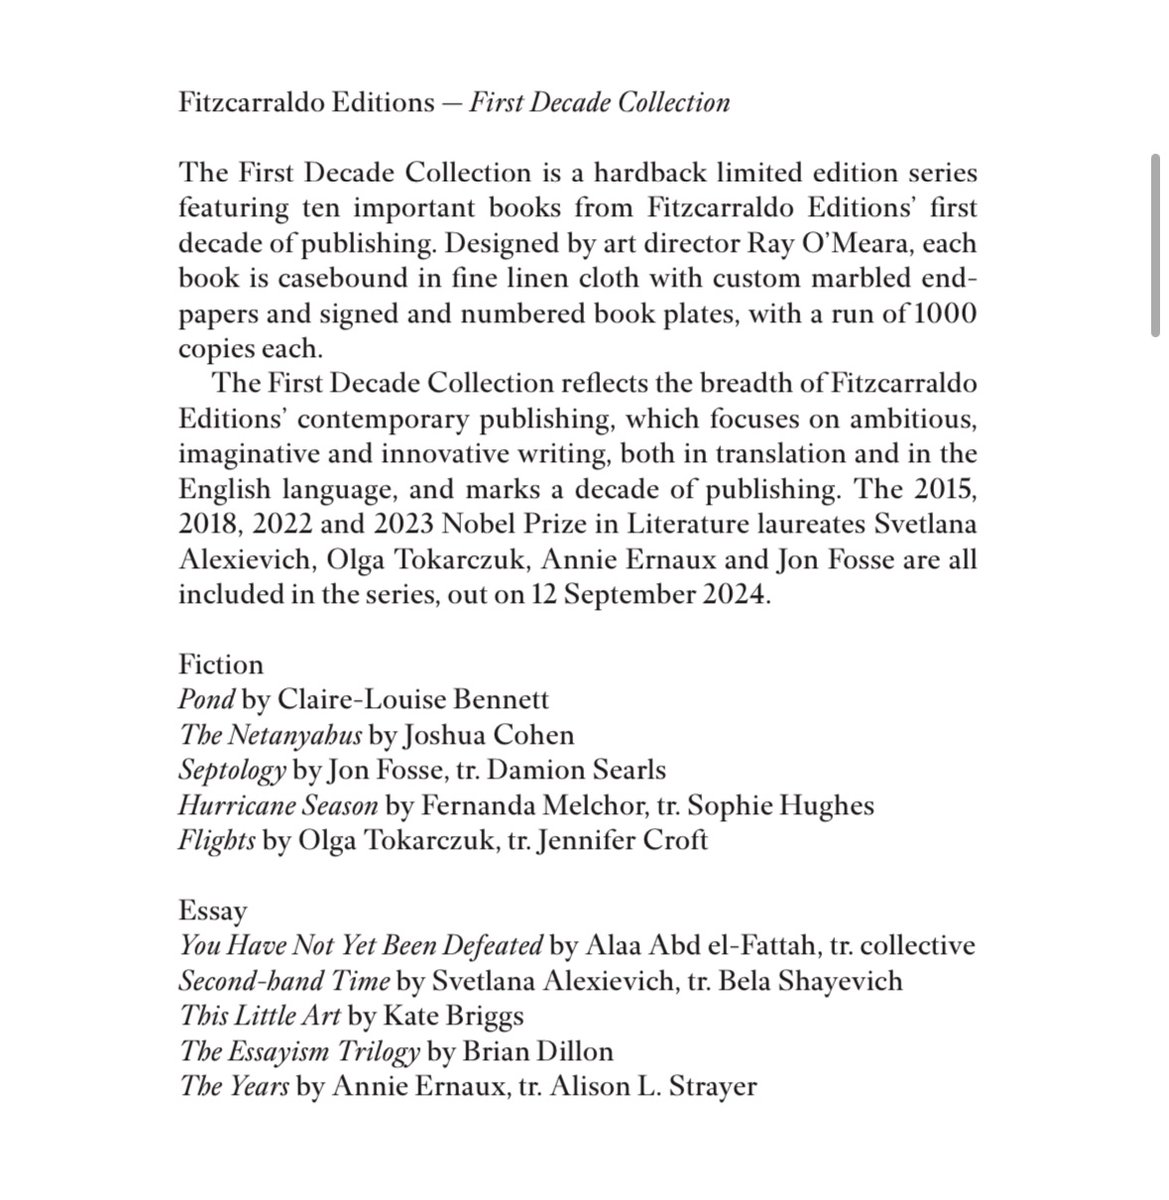 The @FitzcarraldoEds autumn 2024 catalogue is out. In September the First Decade Collection of hardbacks includes THE ESSAYISM TRILOGY! Affinities, Suppose and Sentence, and of course Essayism, in one deluxe but austere volume. fitzcarraldo-editions.s3.amazonaws.com/files/Autumn-2…